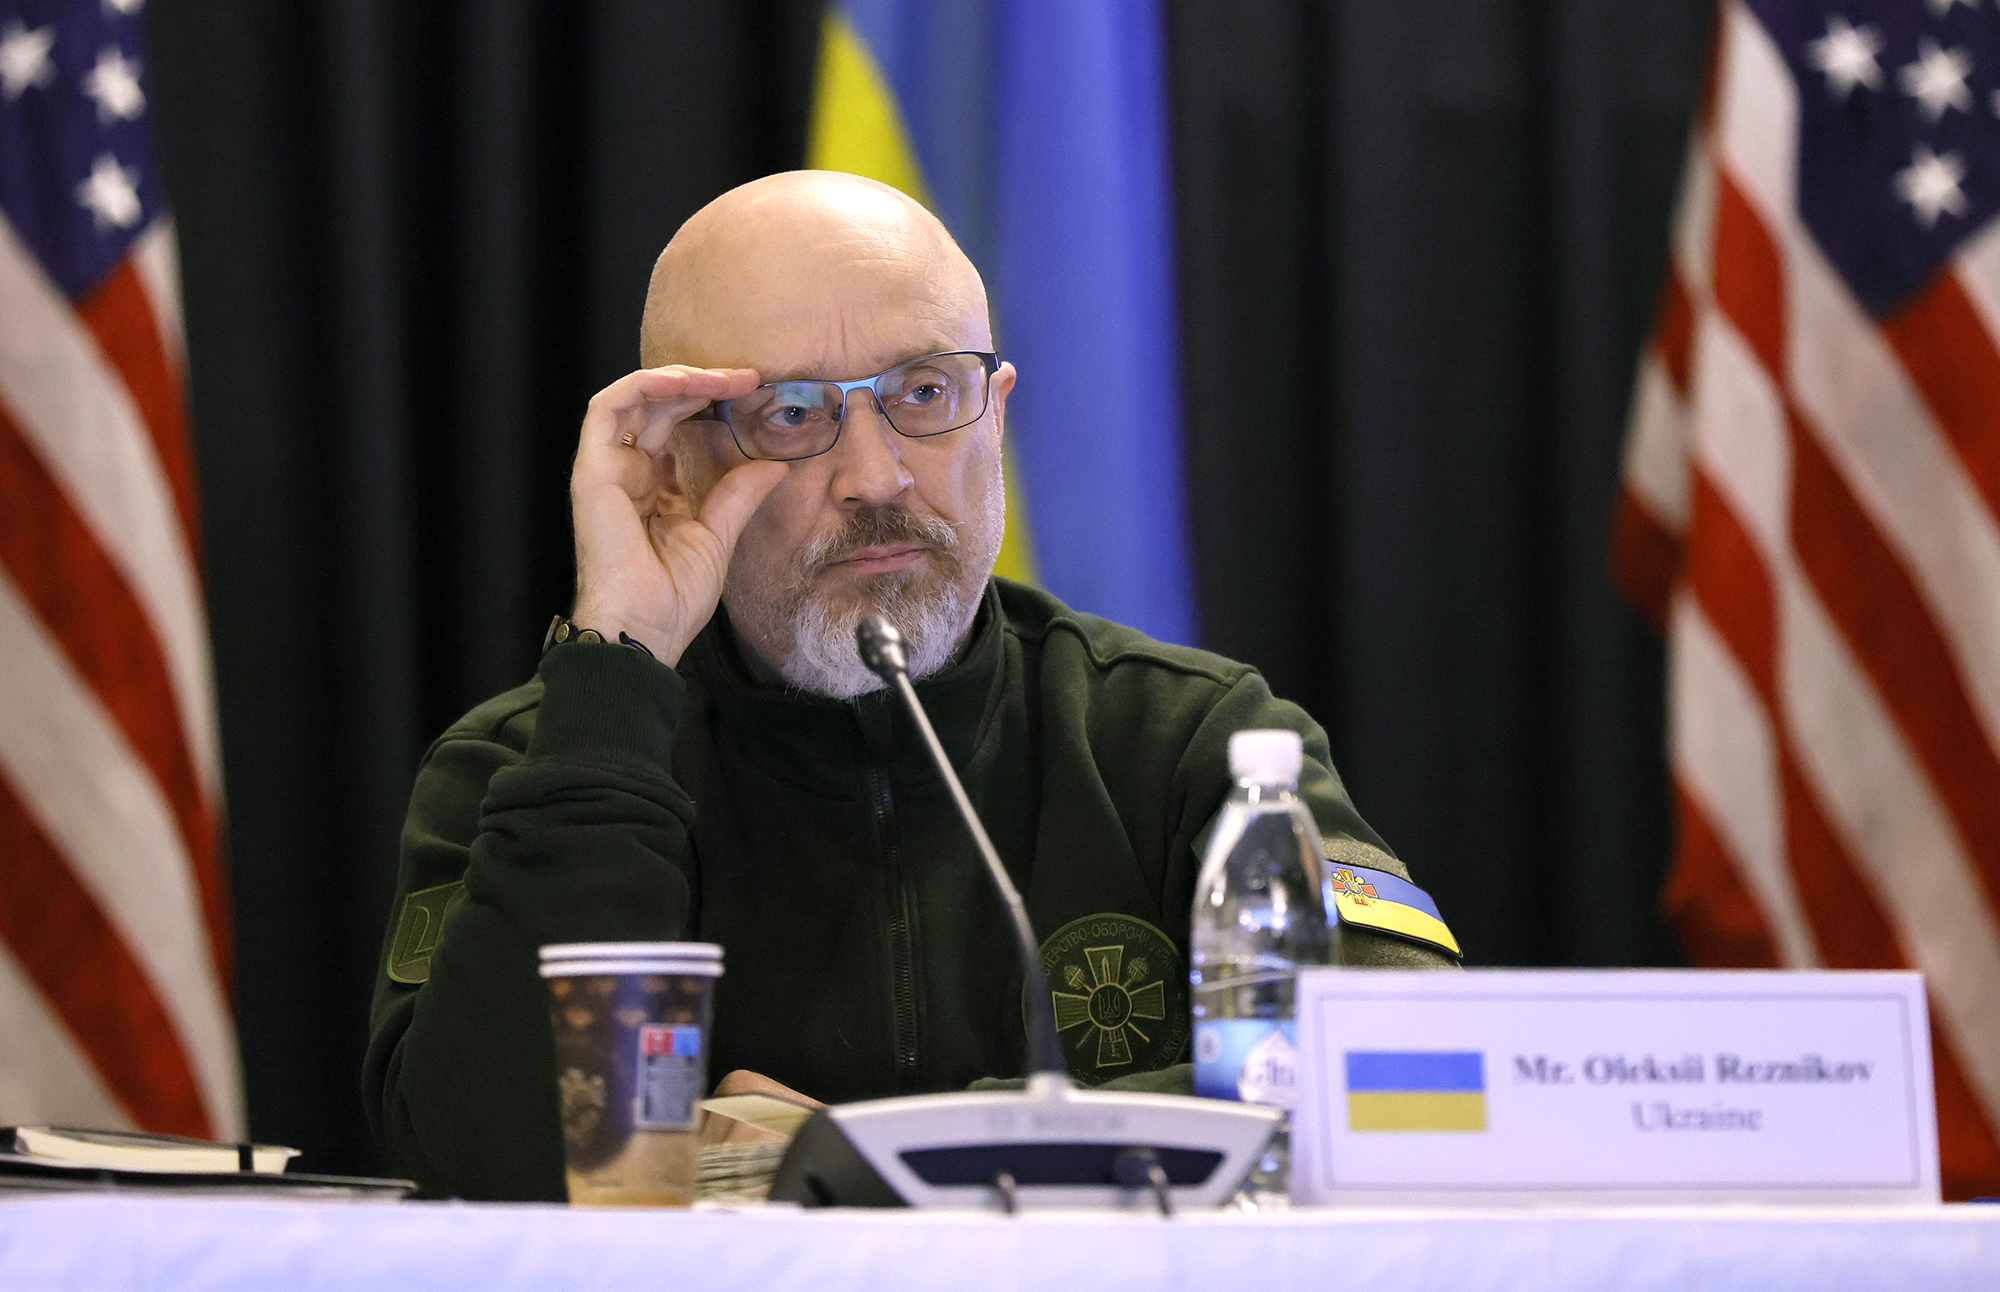 Ukrainian Defense Minister Oleksii Reznikov attends the fourth meeting of Ukraine Defense Contact Group at the US Air Base in Ramstein, Germany, on April 21.